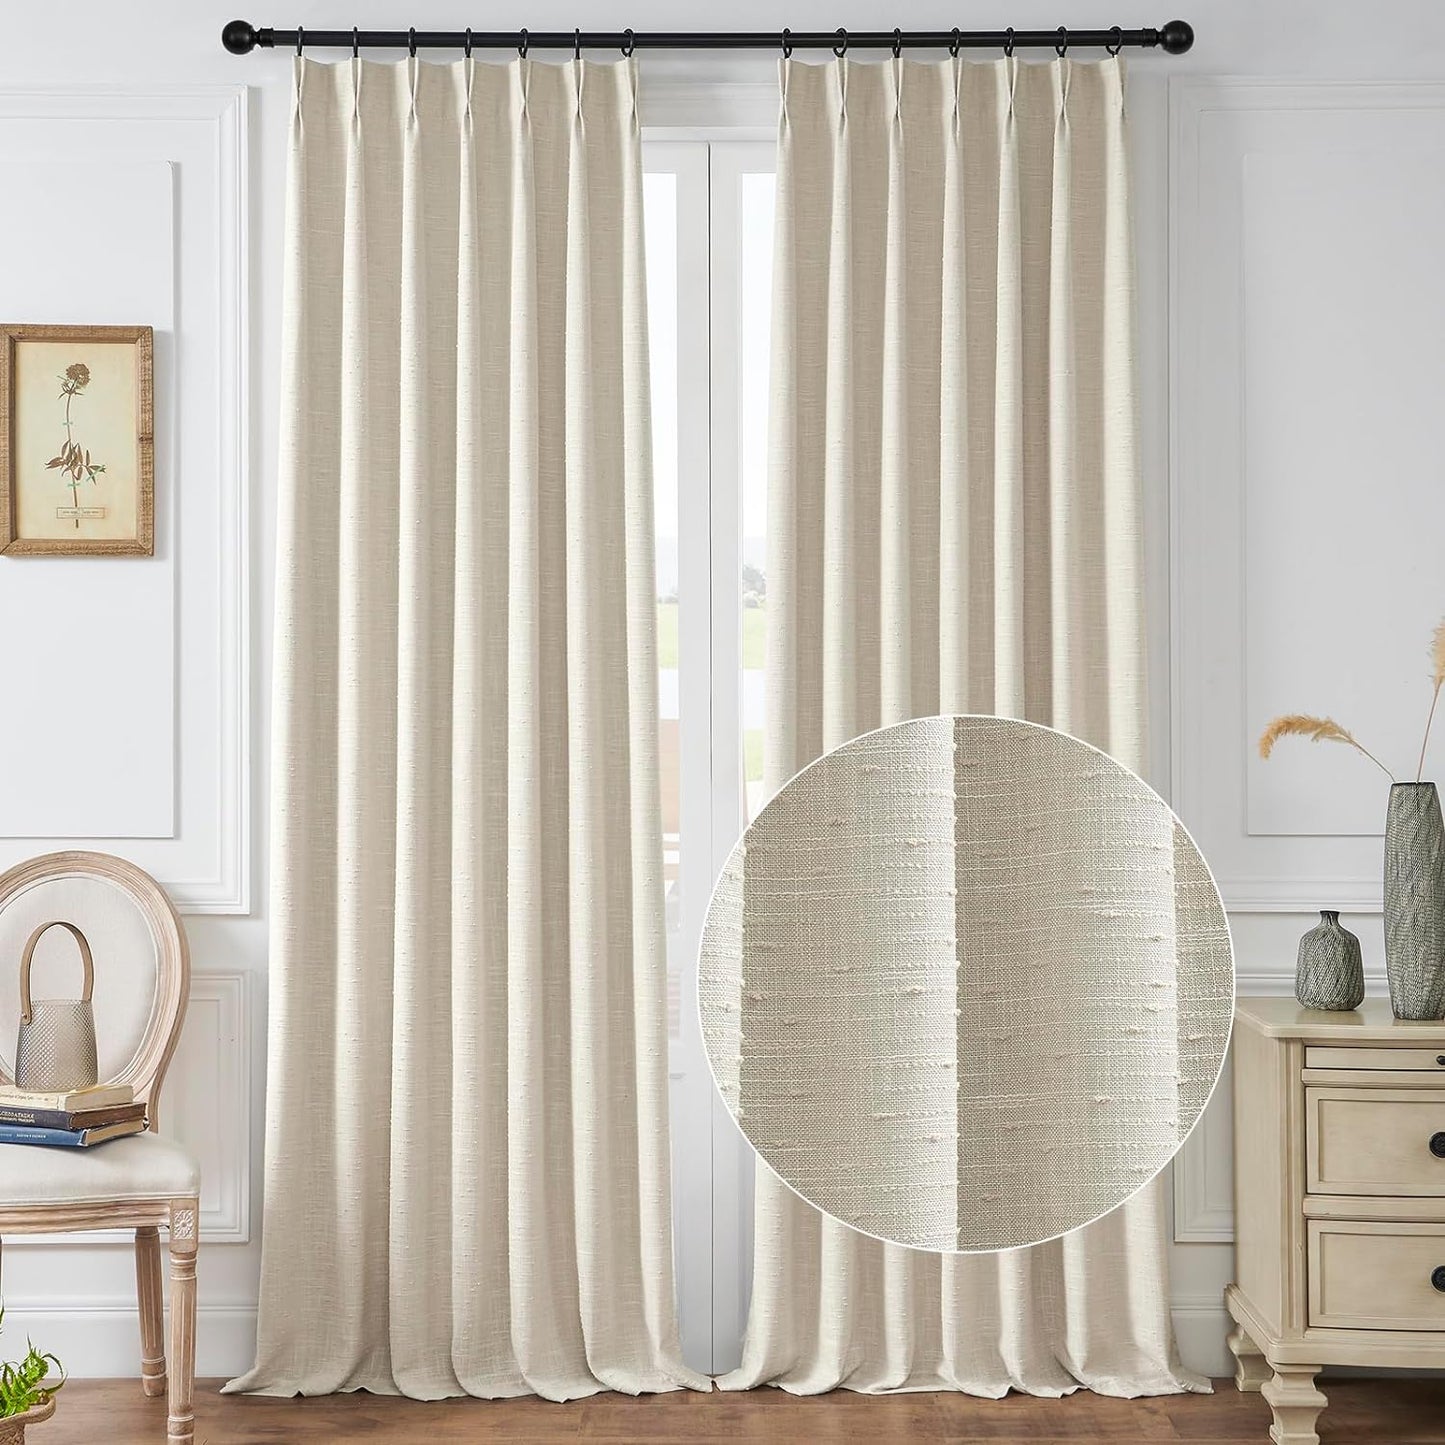 Maison Colette Pinch Pleat White Natural Linen Curtain 84 Inches Length for Bedroom,Back Tab Semi Sheer Window Treatment Drapes for Living Room,2 Panels,40" Width  Maison Colette Home Linen 40"W X 108"L 